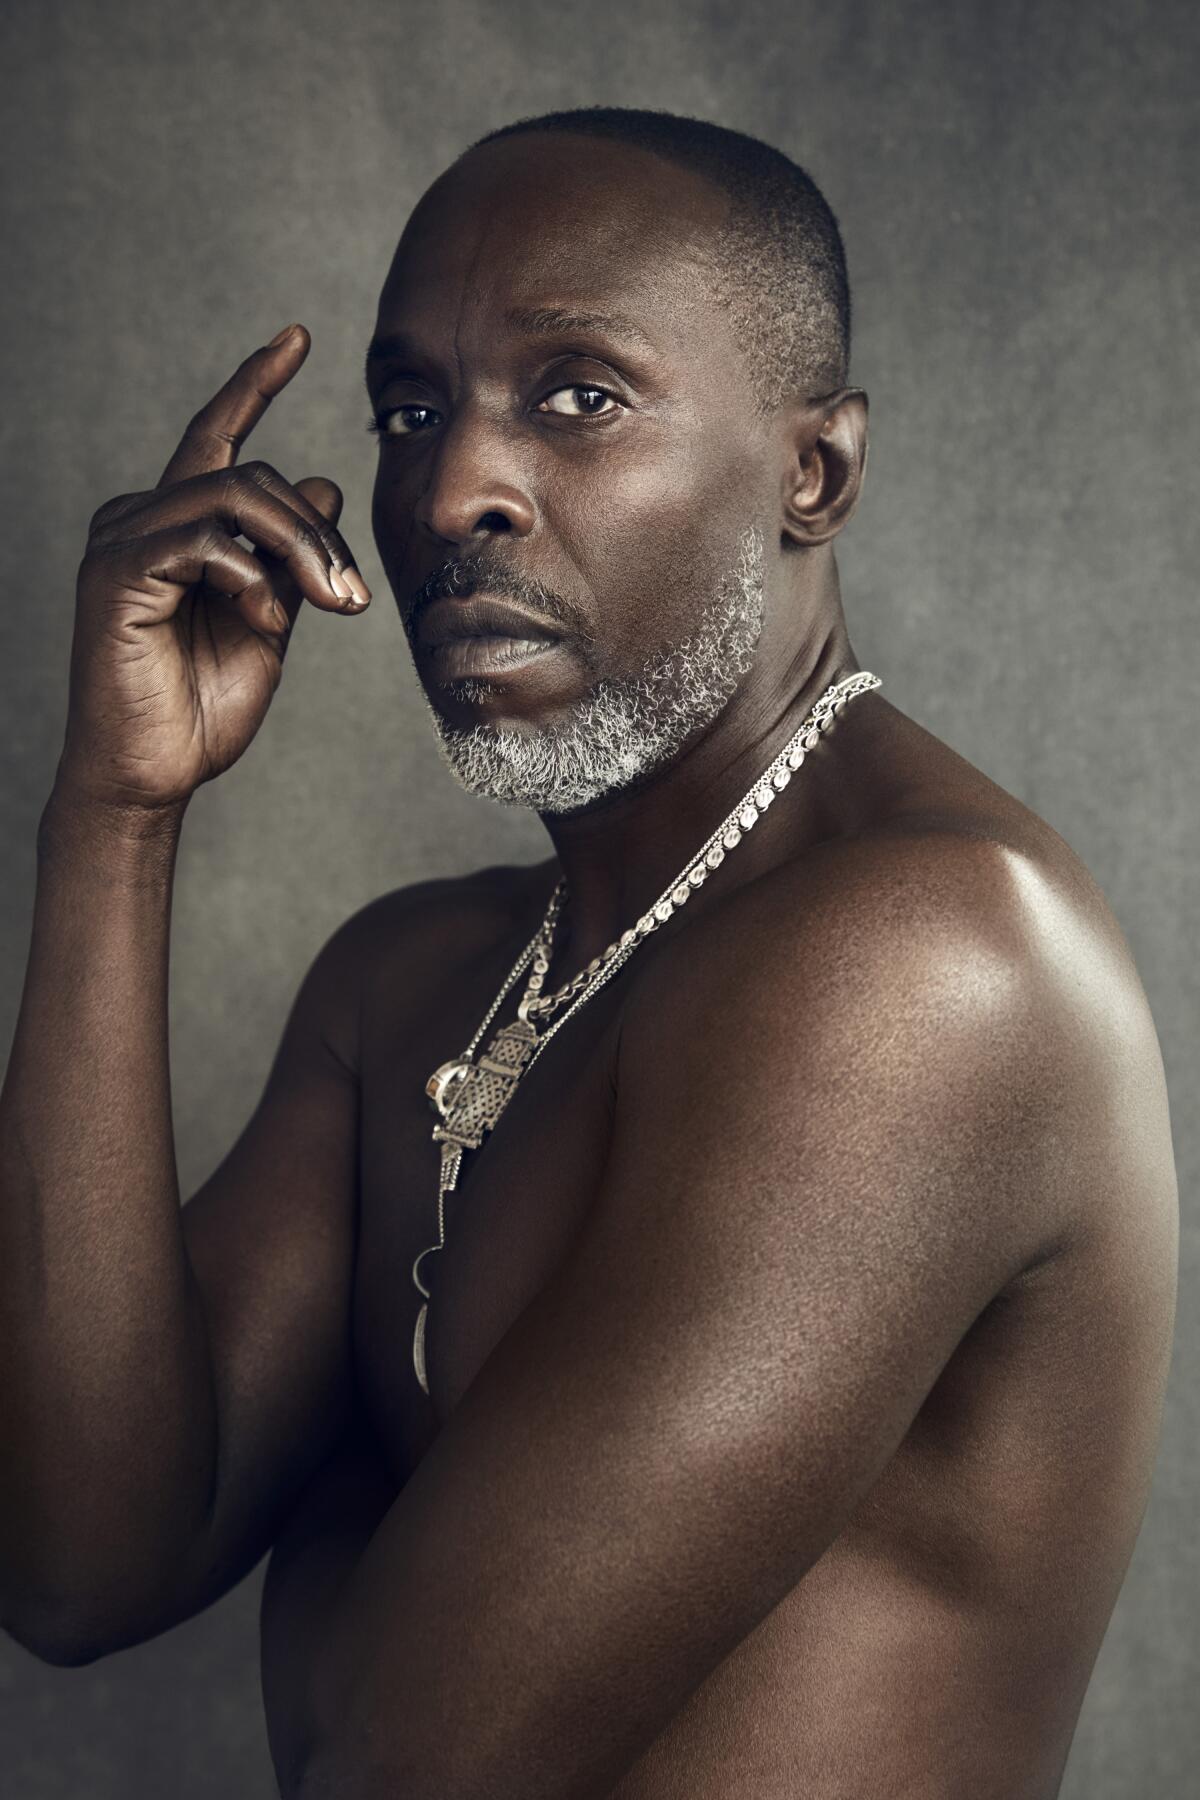 Michael K. Williams, photographed shirtless, in partial profile, looking directly at the camera. 